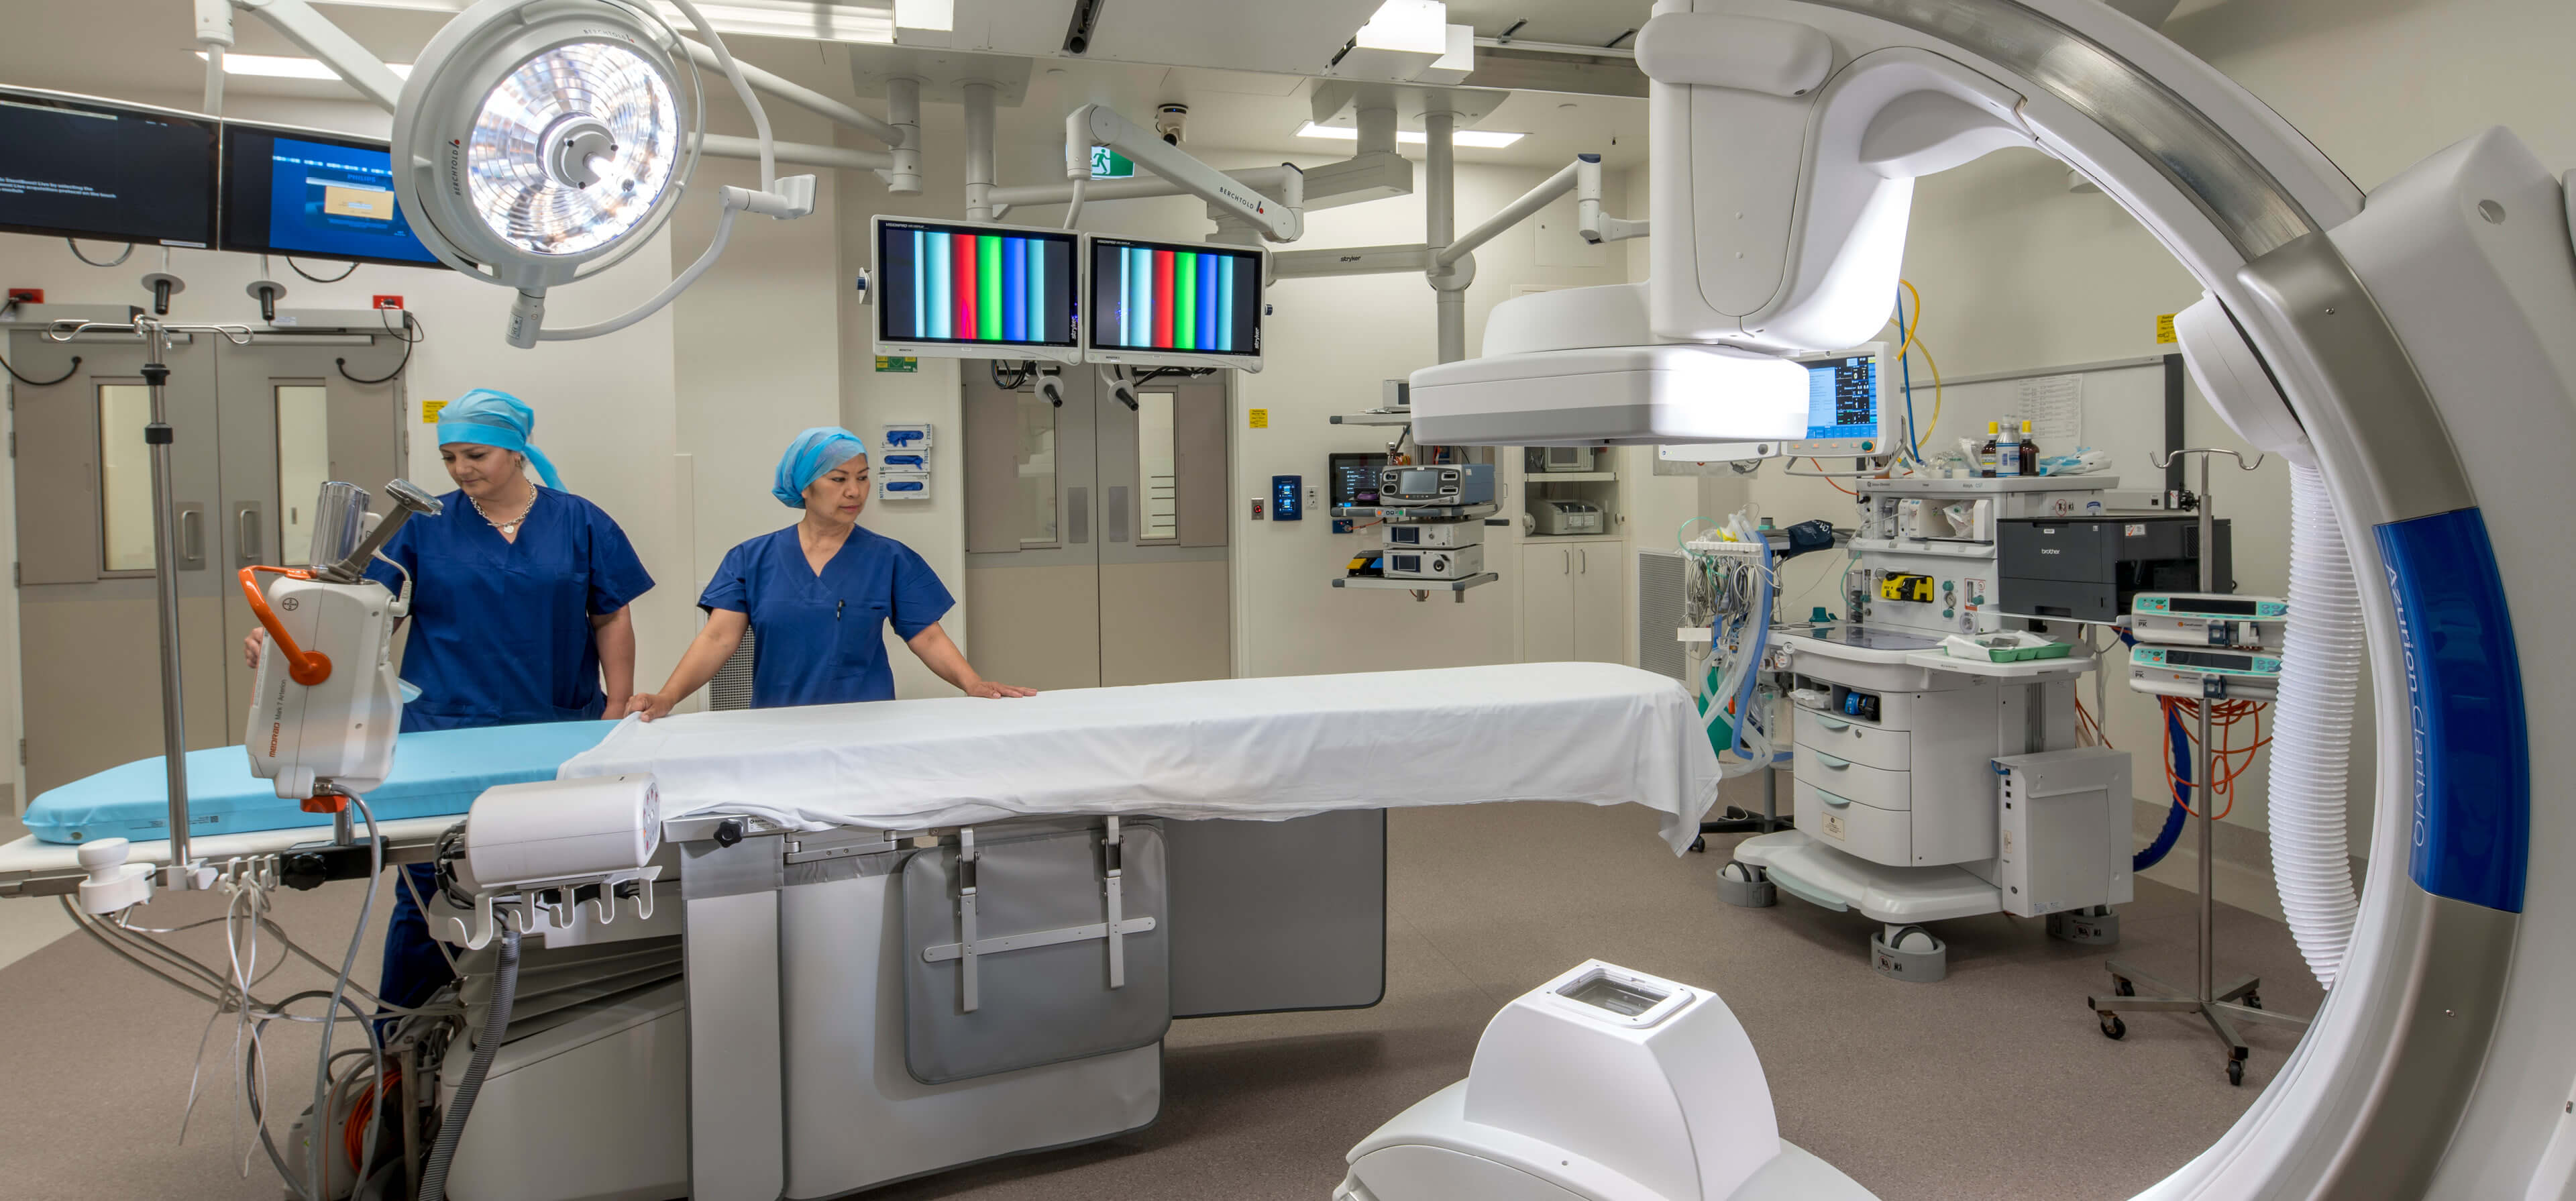 5 operating room sydney south west private hospital taylor construction health and aged care